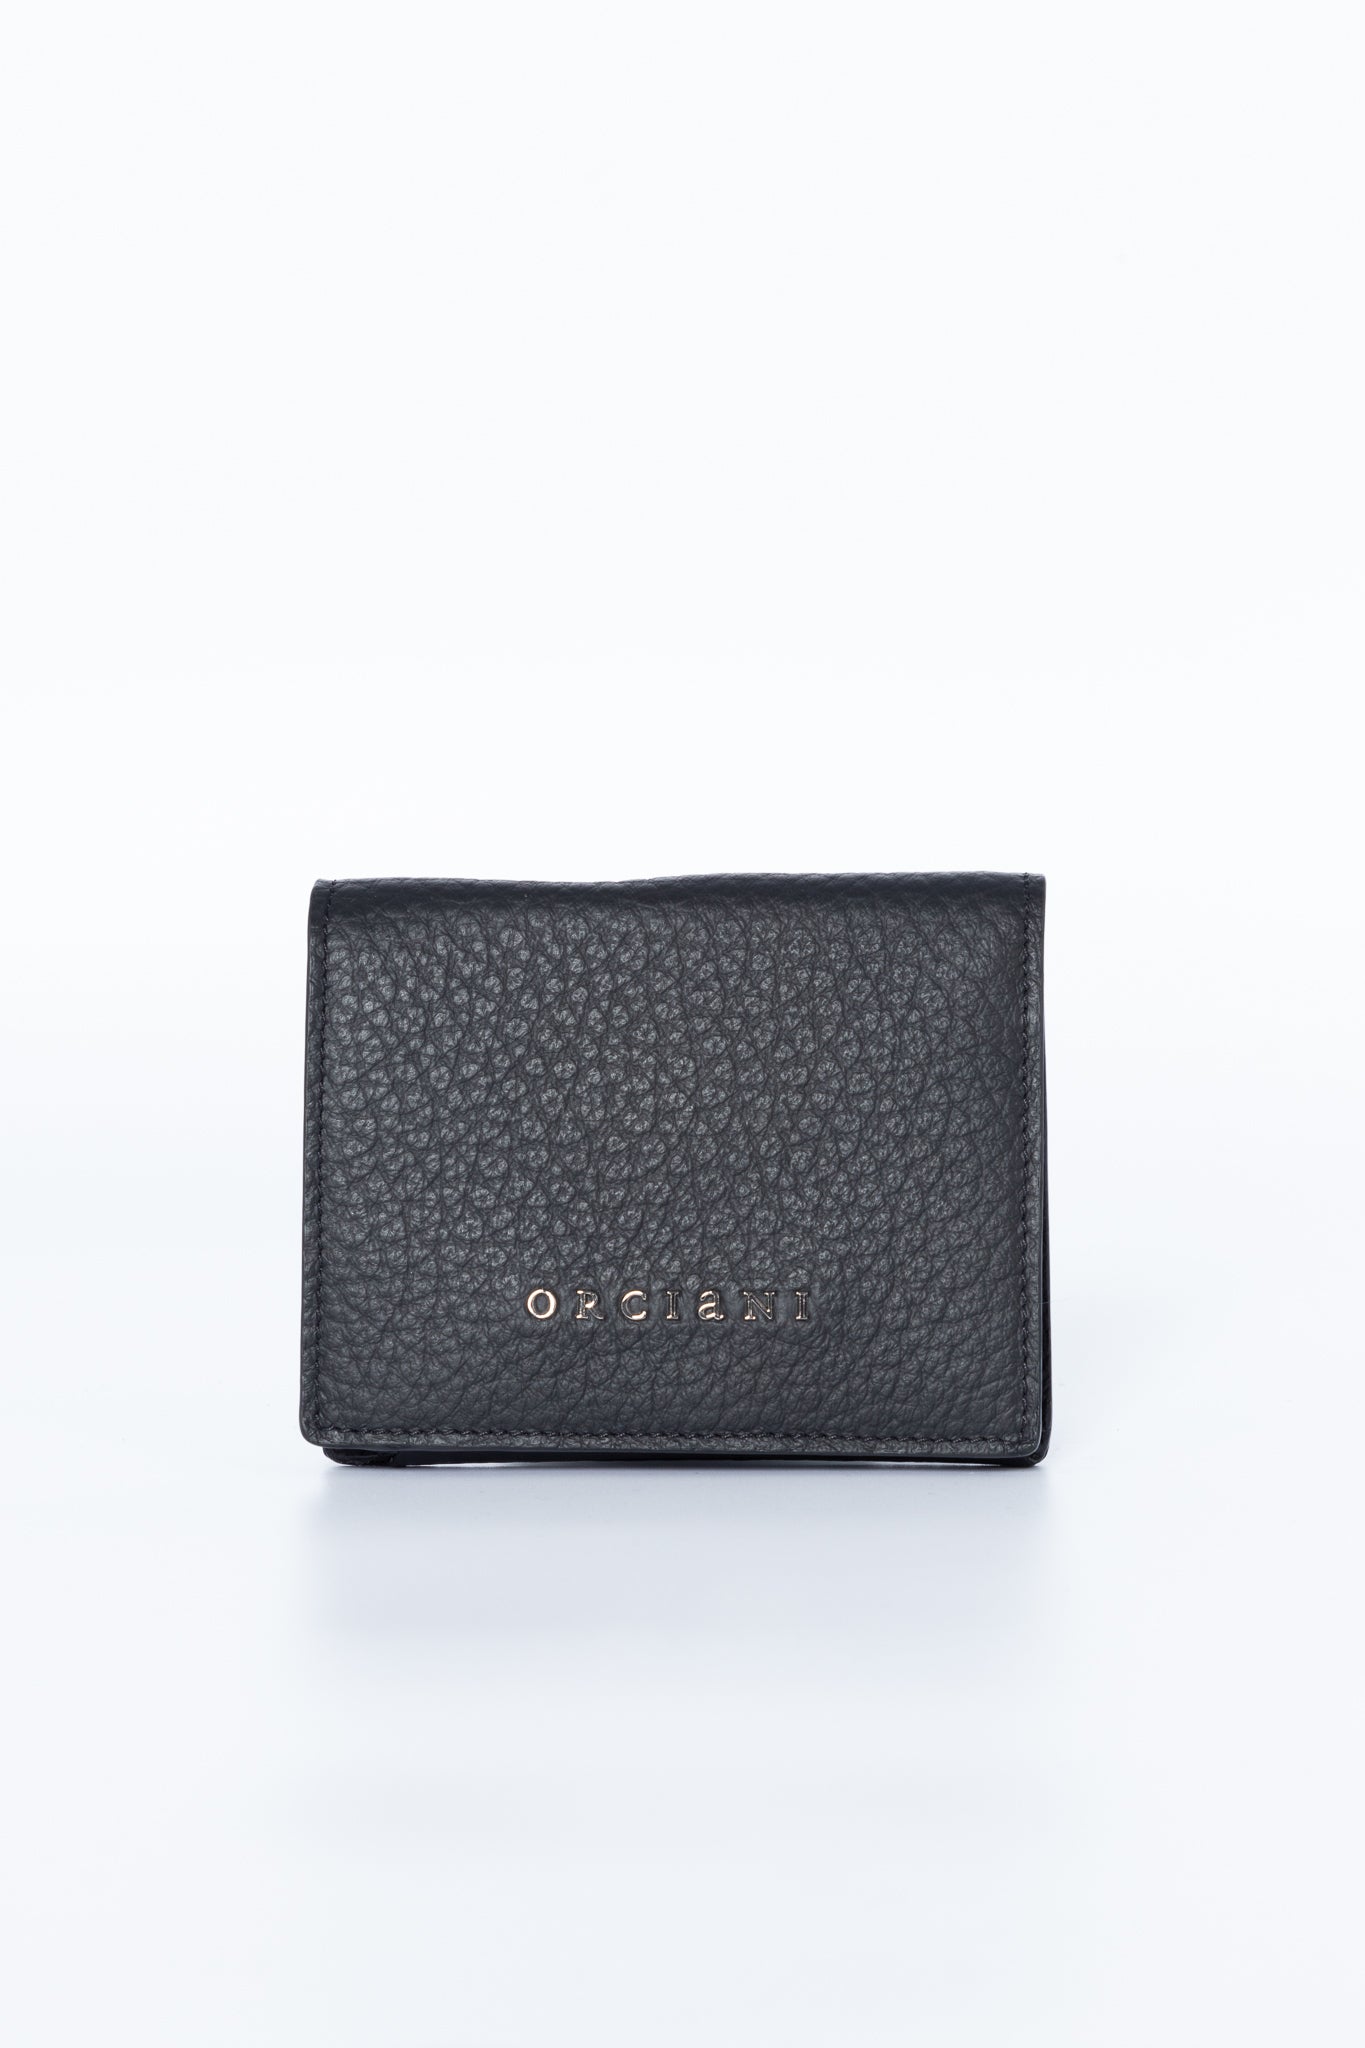 Orciani Wallet With Coin Purse Black Woman - Motta Fashion Place